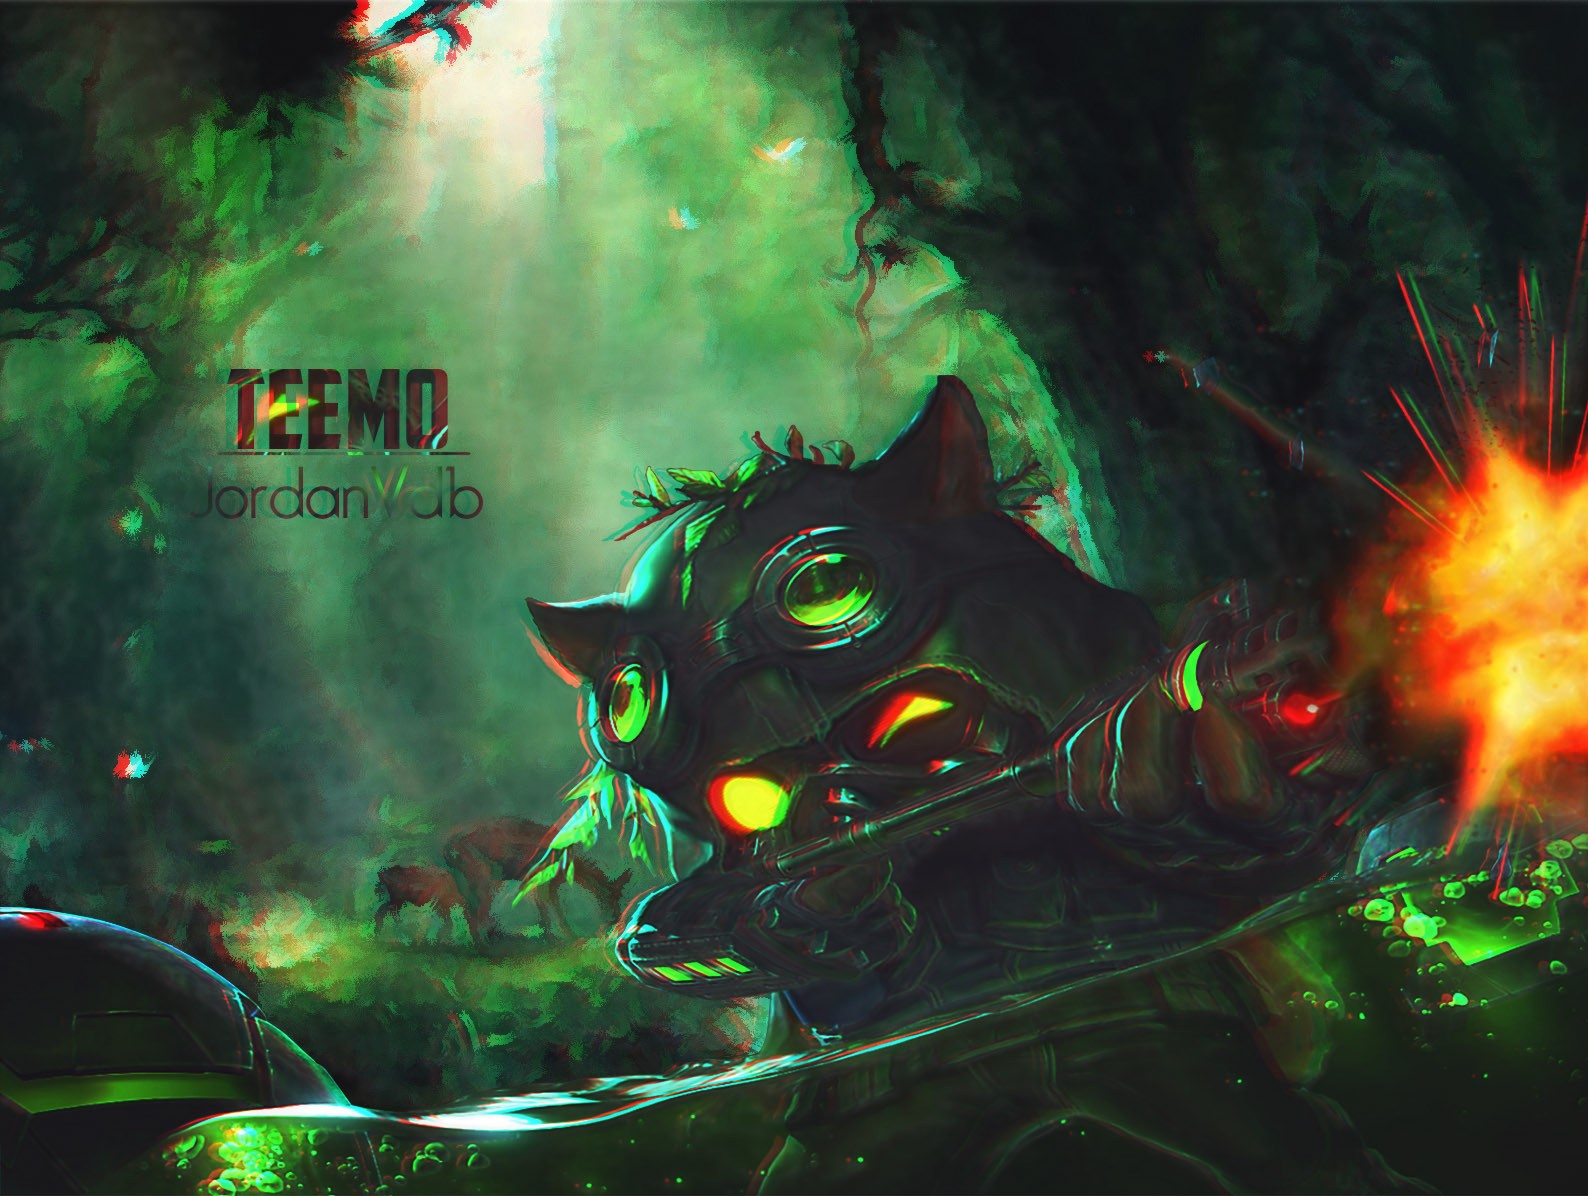 General 1588x1196 Riot Games League of Legends trolls video game characters Teemo (League of Legends) PC gaming digital art